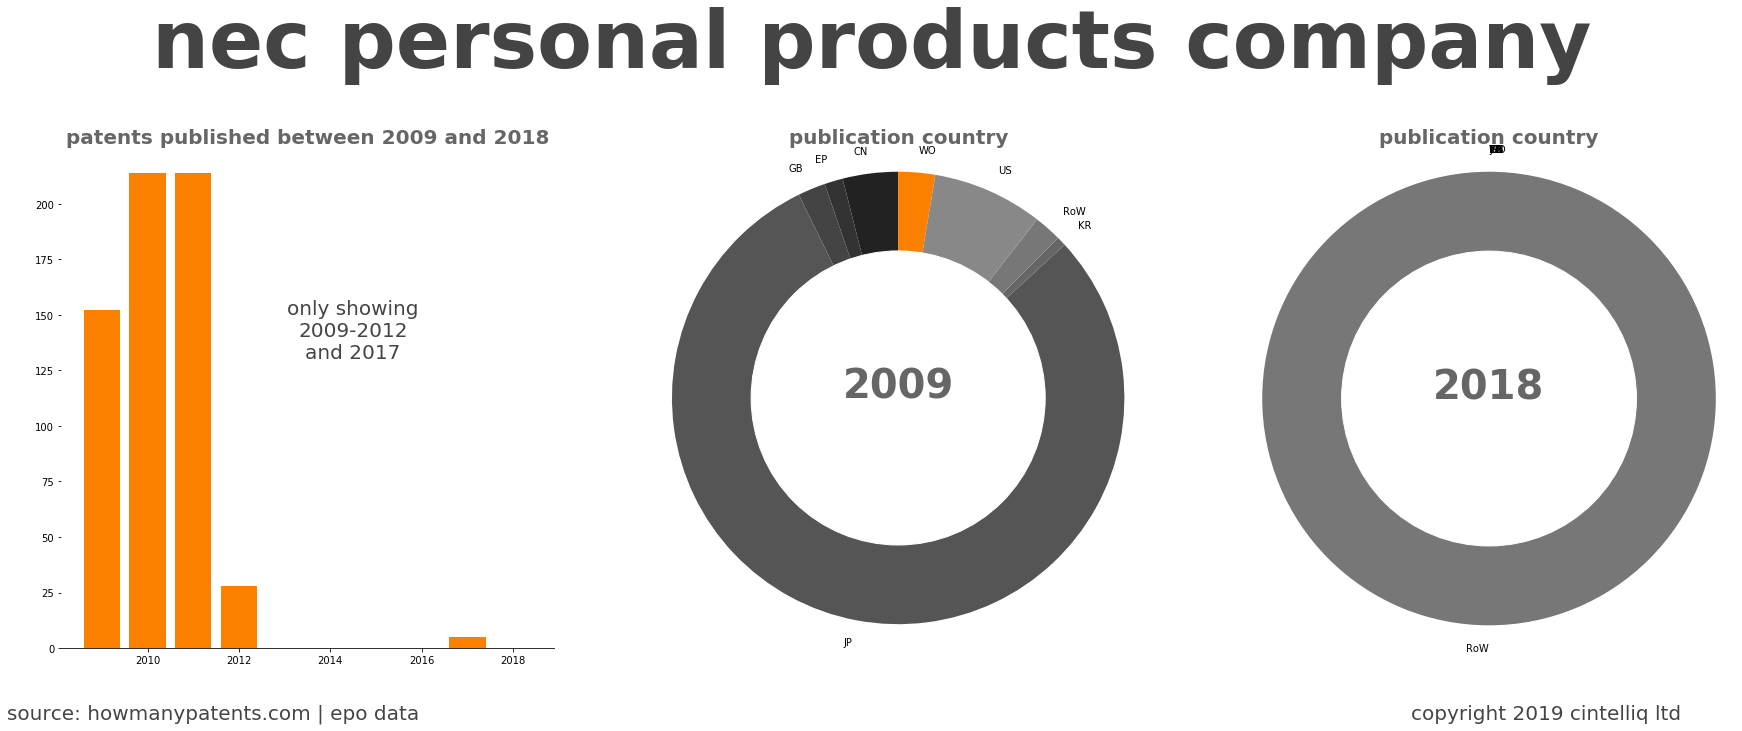 summary of patents for Nec Personal Products Company